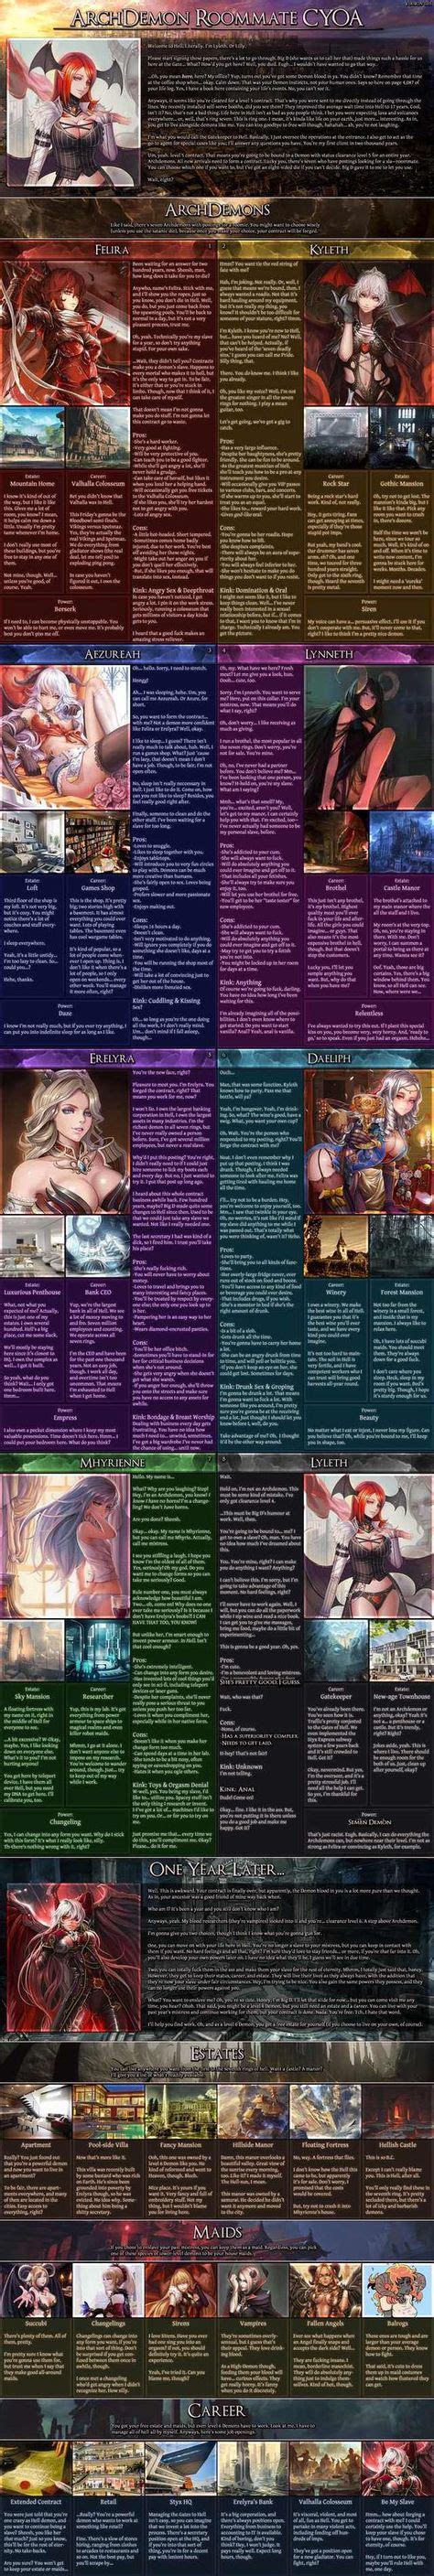 archroommate cyoa compendium from tg in 2020 cyoa create your own adventure cyoa games